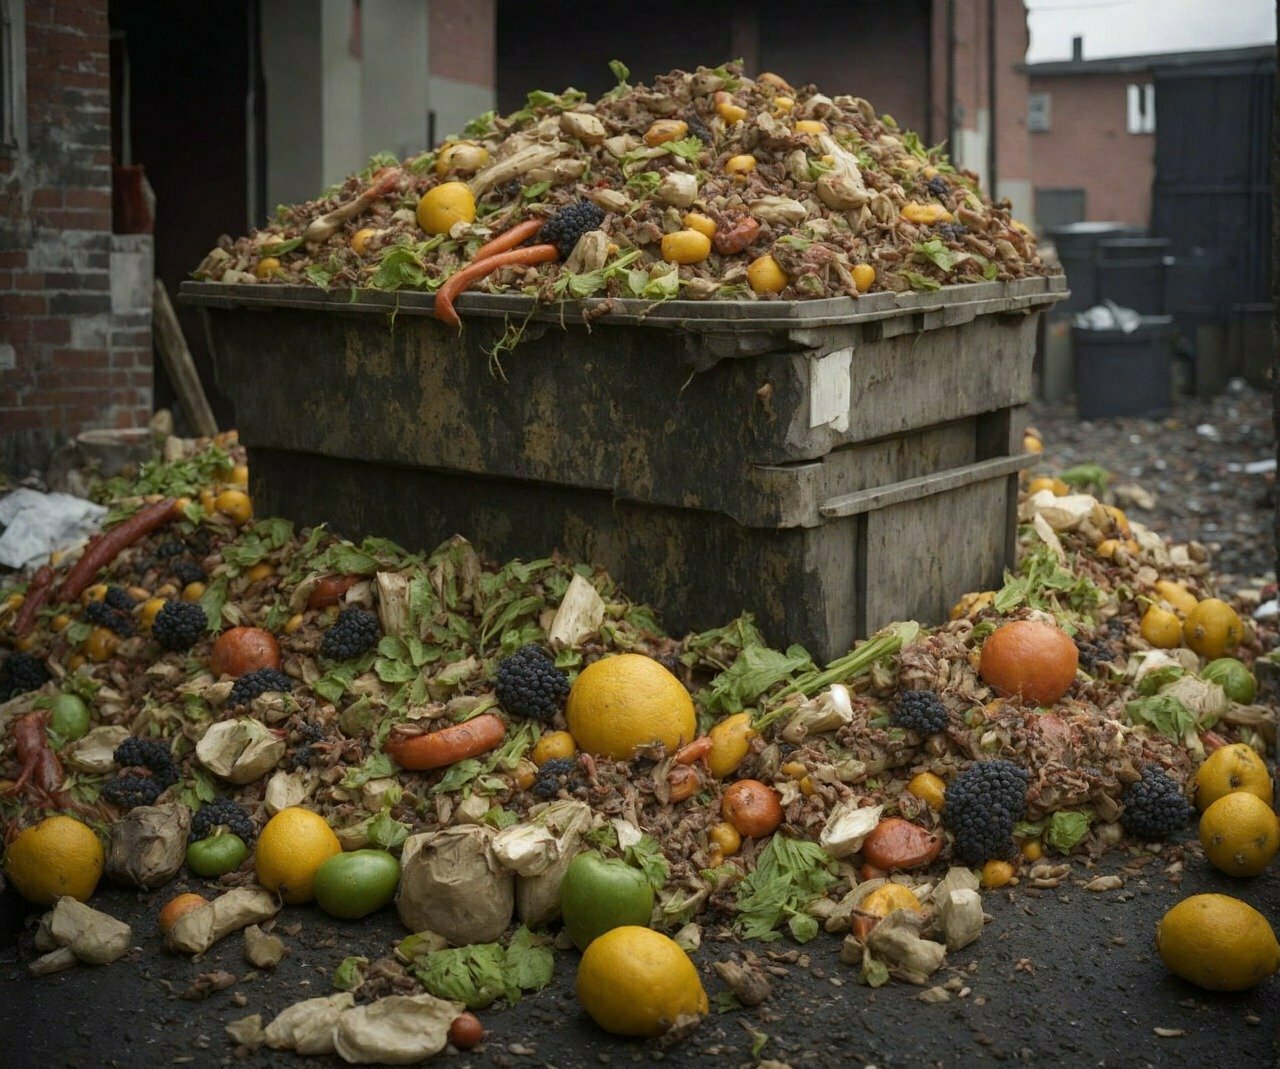 Food Waste Whose responsibility is it